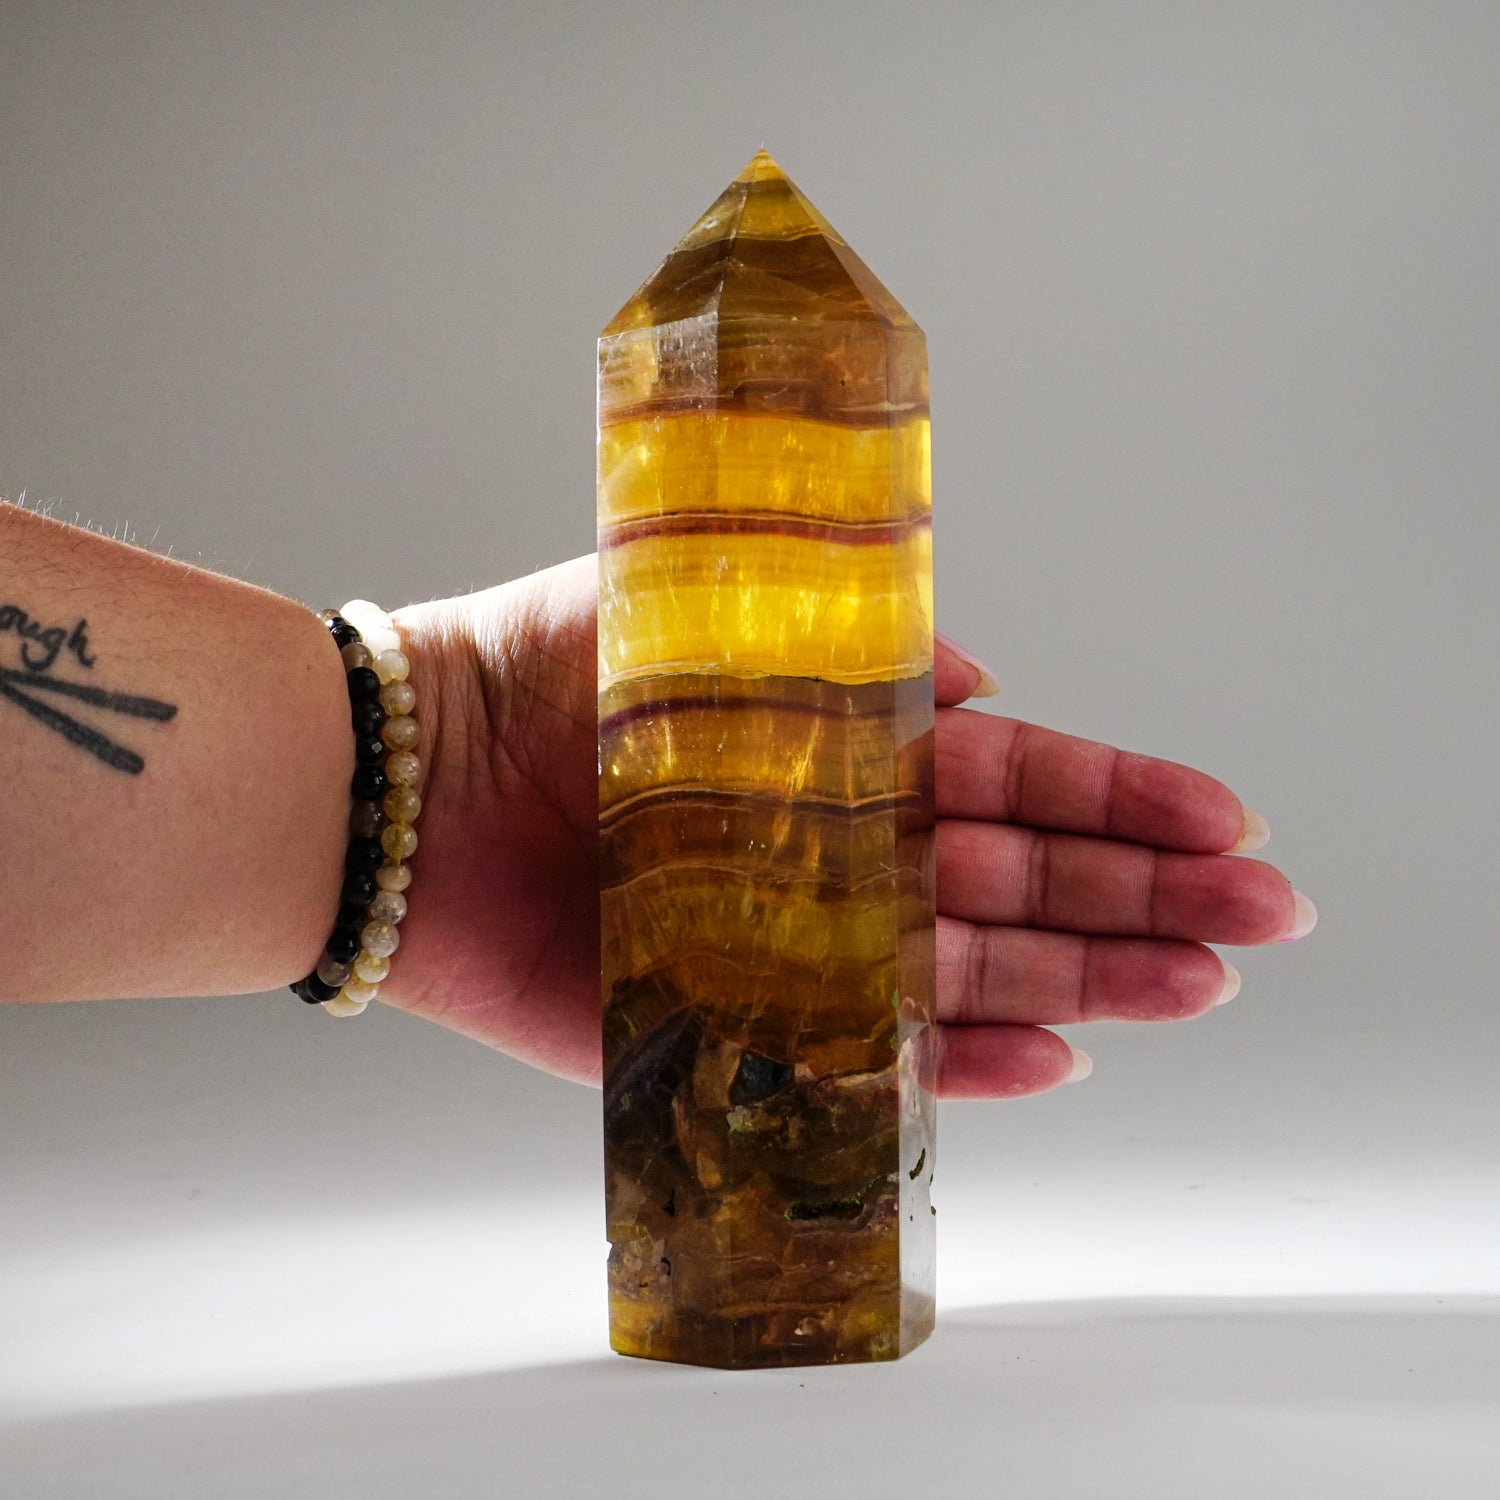 Genuine Polished Yellow Fluorite Point from Argentina (2.6 lbs)